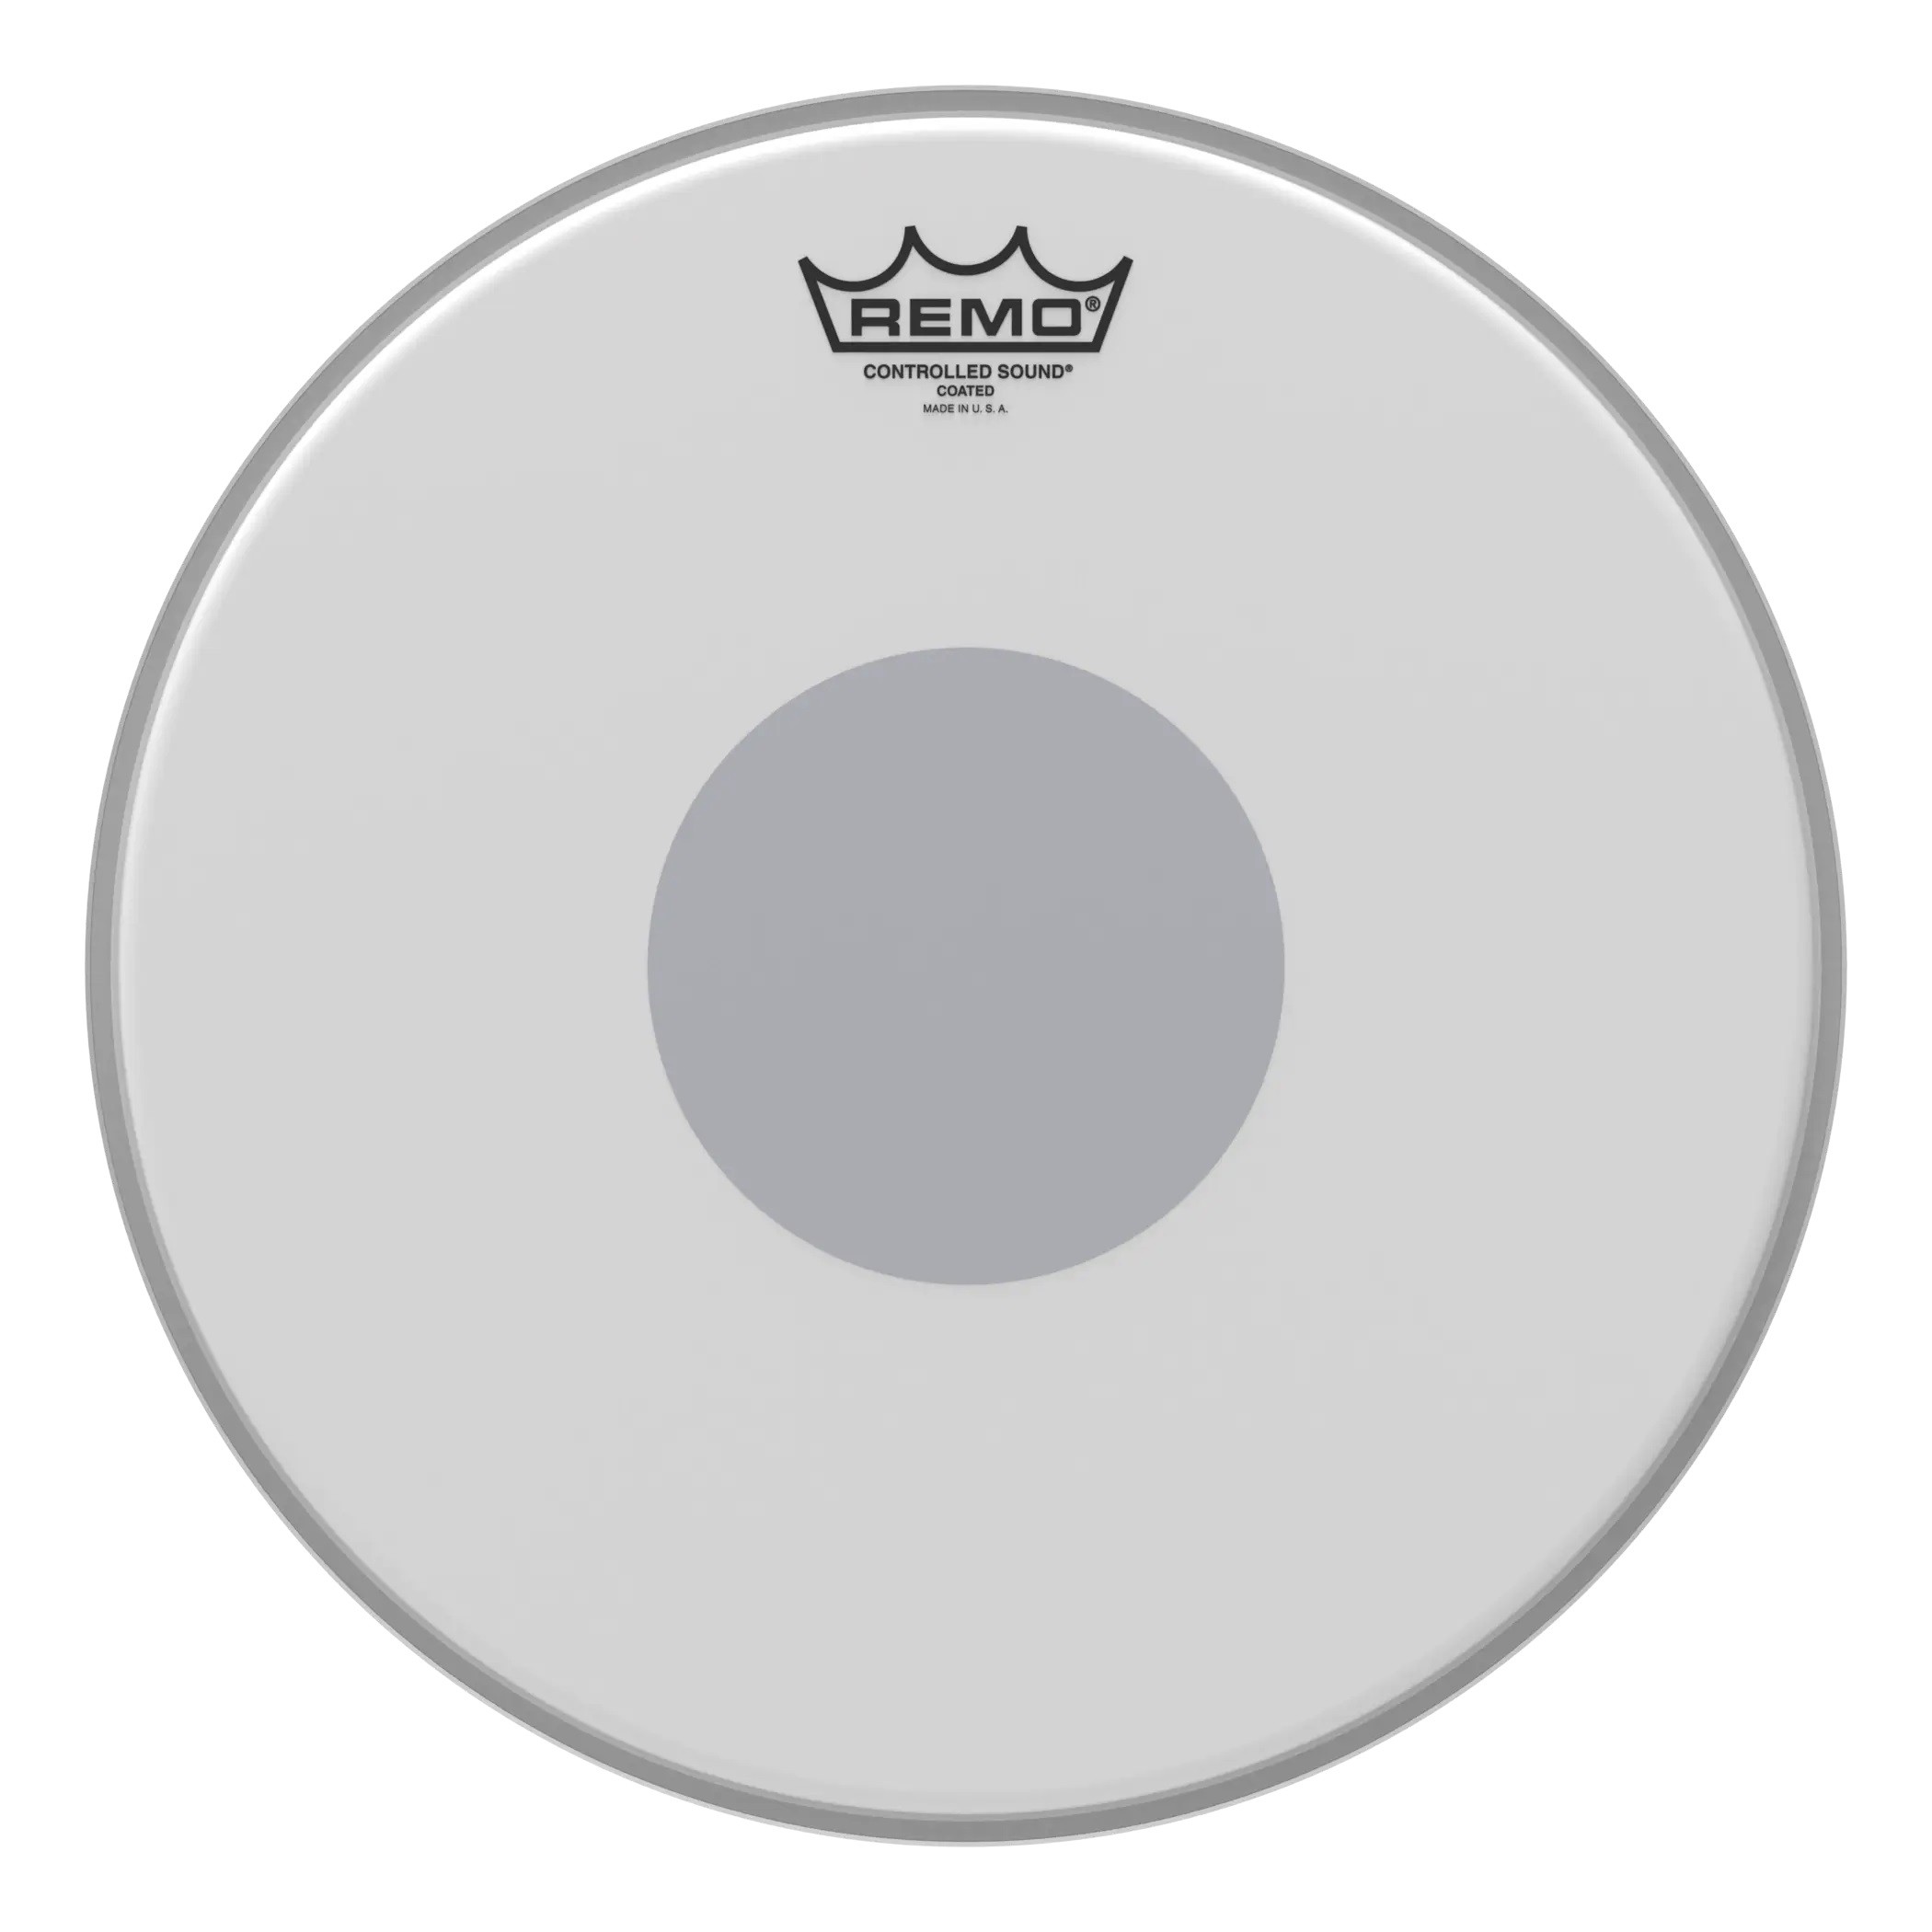 REMO -  13" Controlled Sound Coated-Black Dot